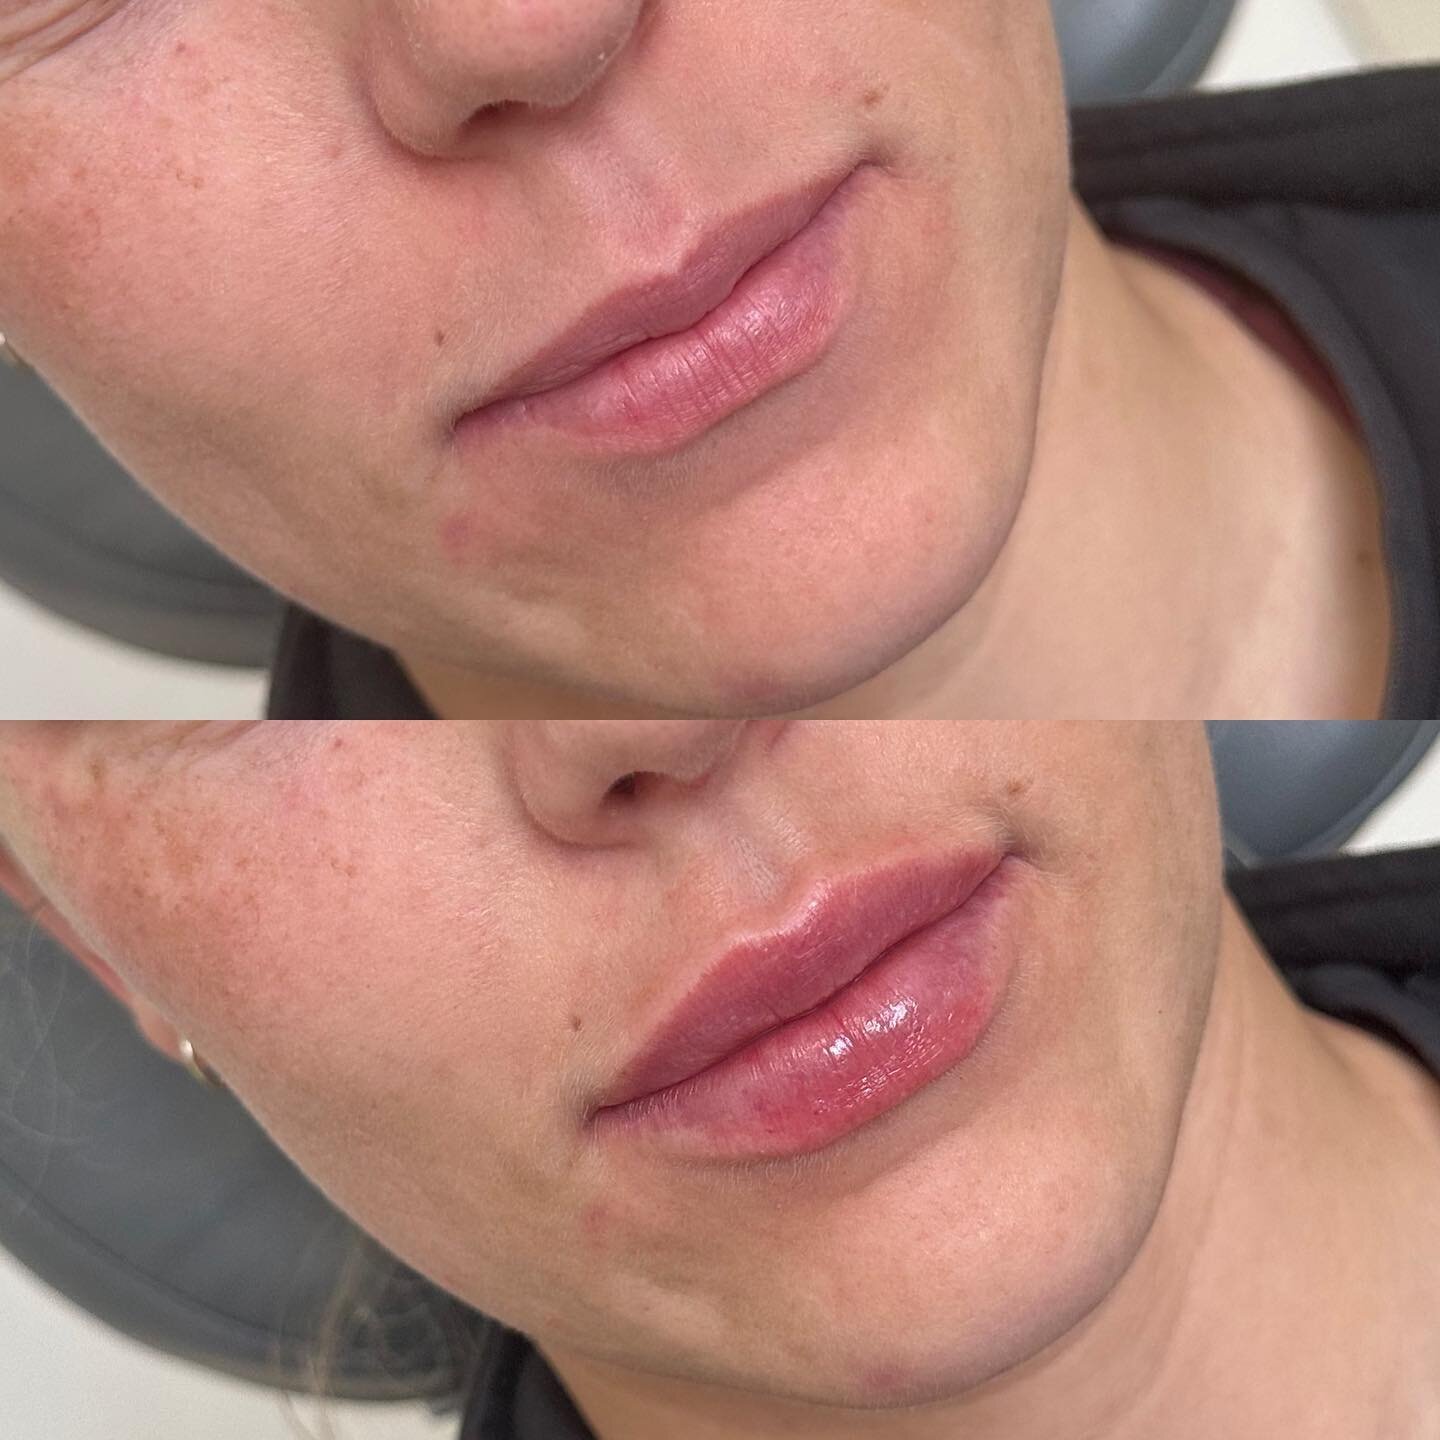 Fresh ✨

Small amounts of HA filler injected in the right places can make a world of difference, yet look so natural 🤎

Photos immediately before and after injections ✨